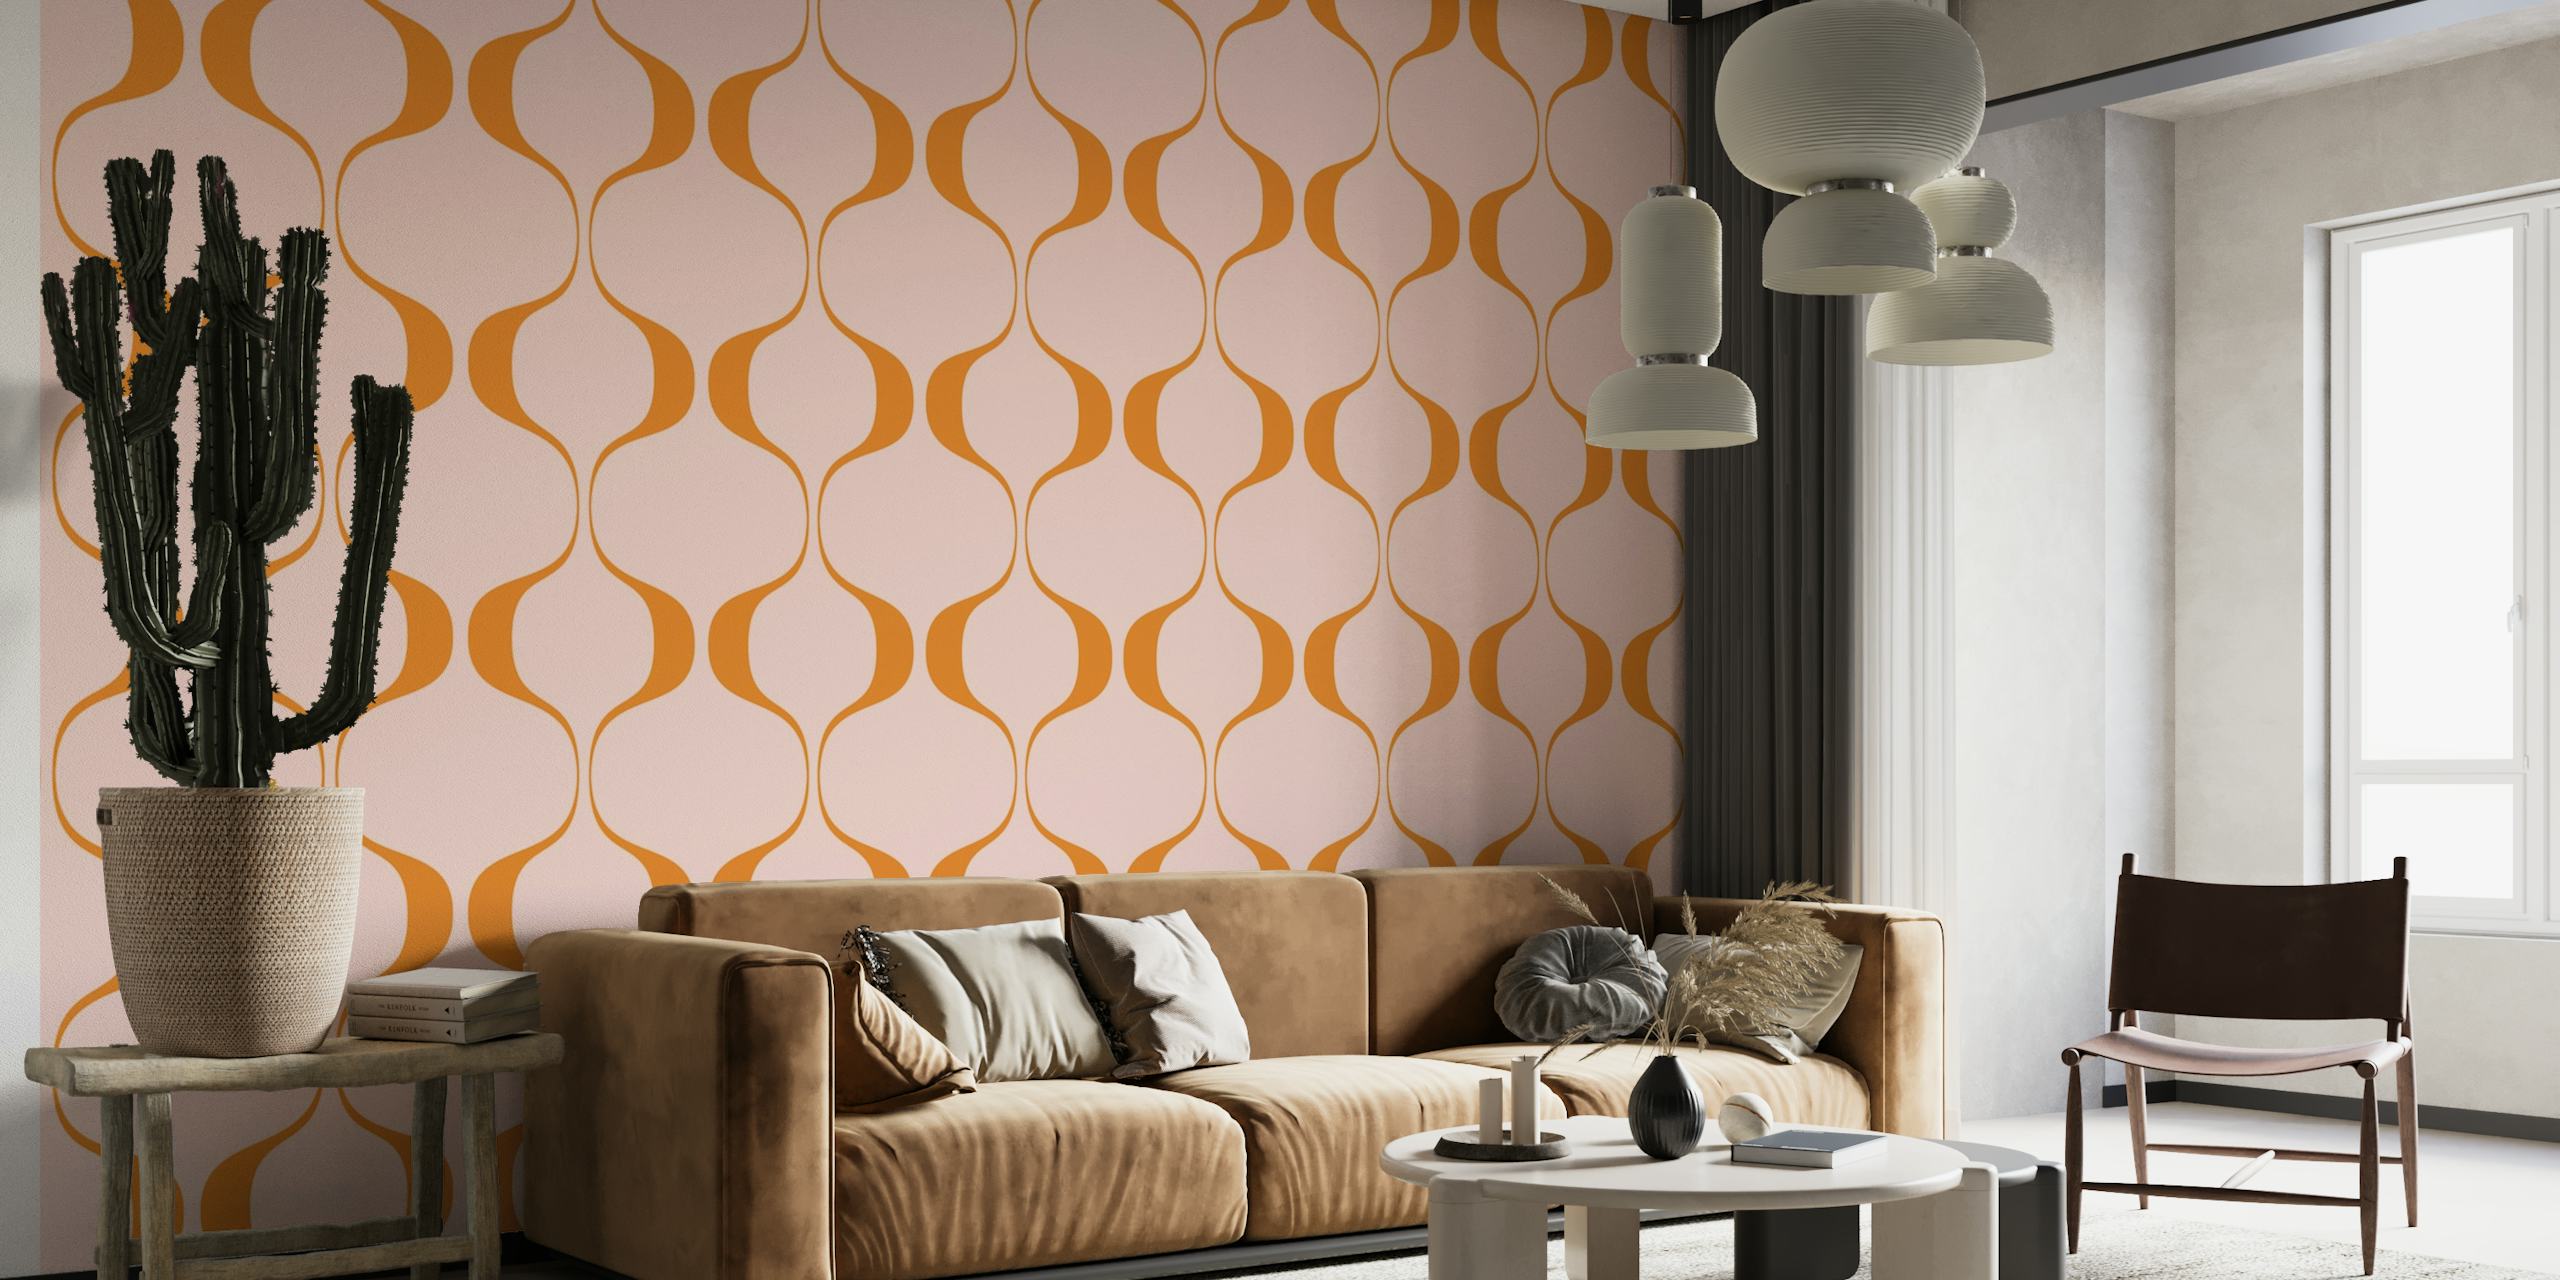 Vintage abstract geometric pattern wall mural in orange and pink tones